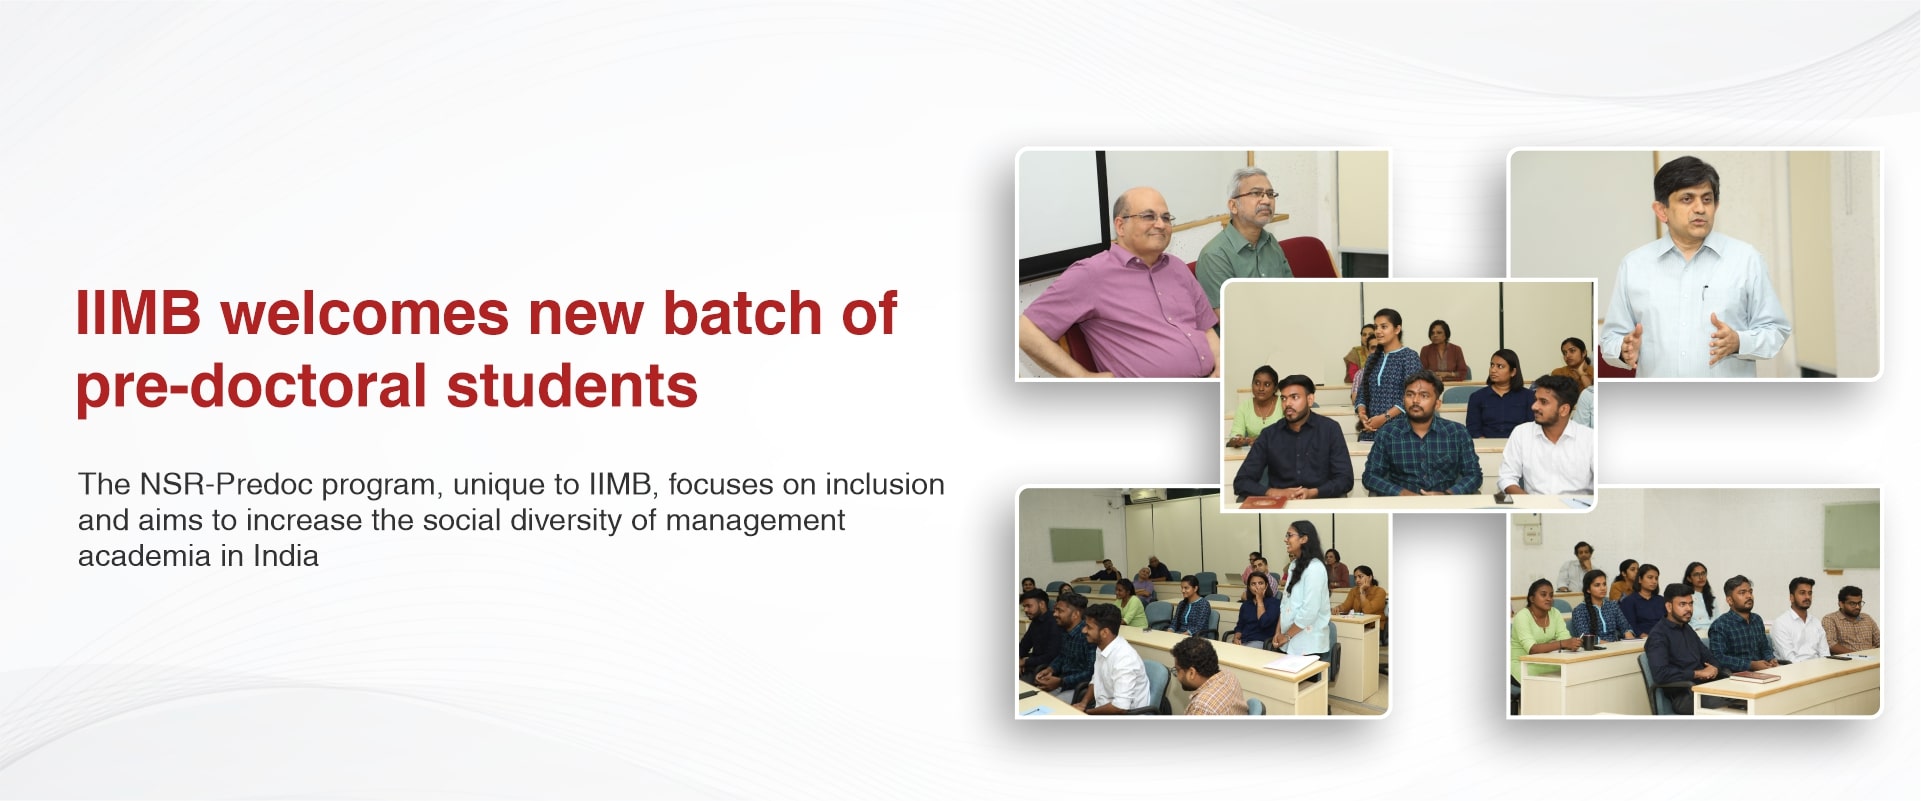 IIMB welcomes new batch of pre-doctoral students